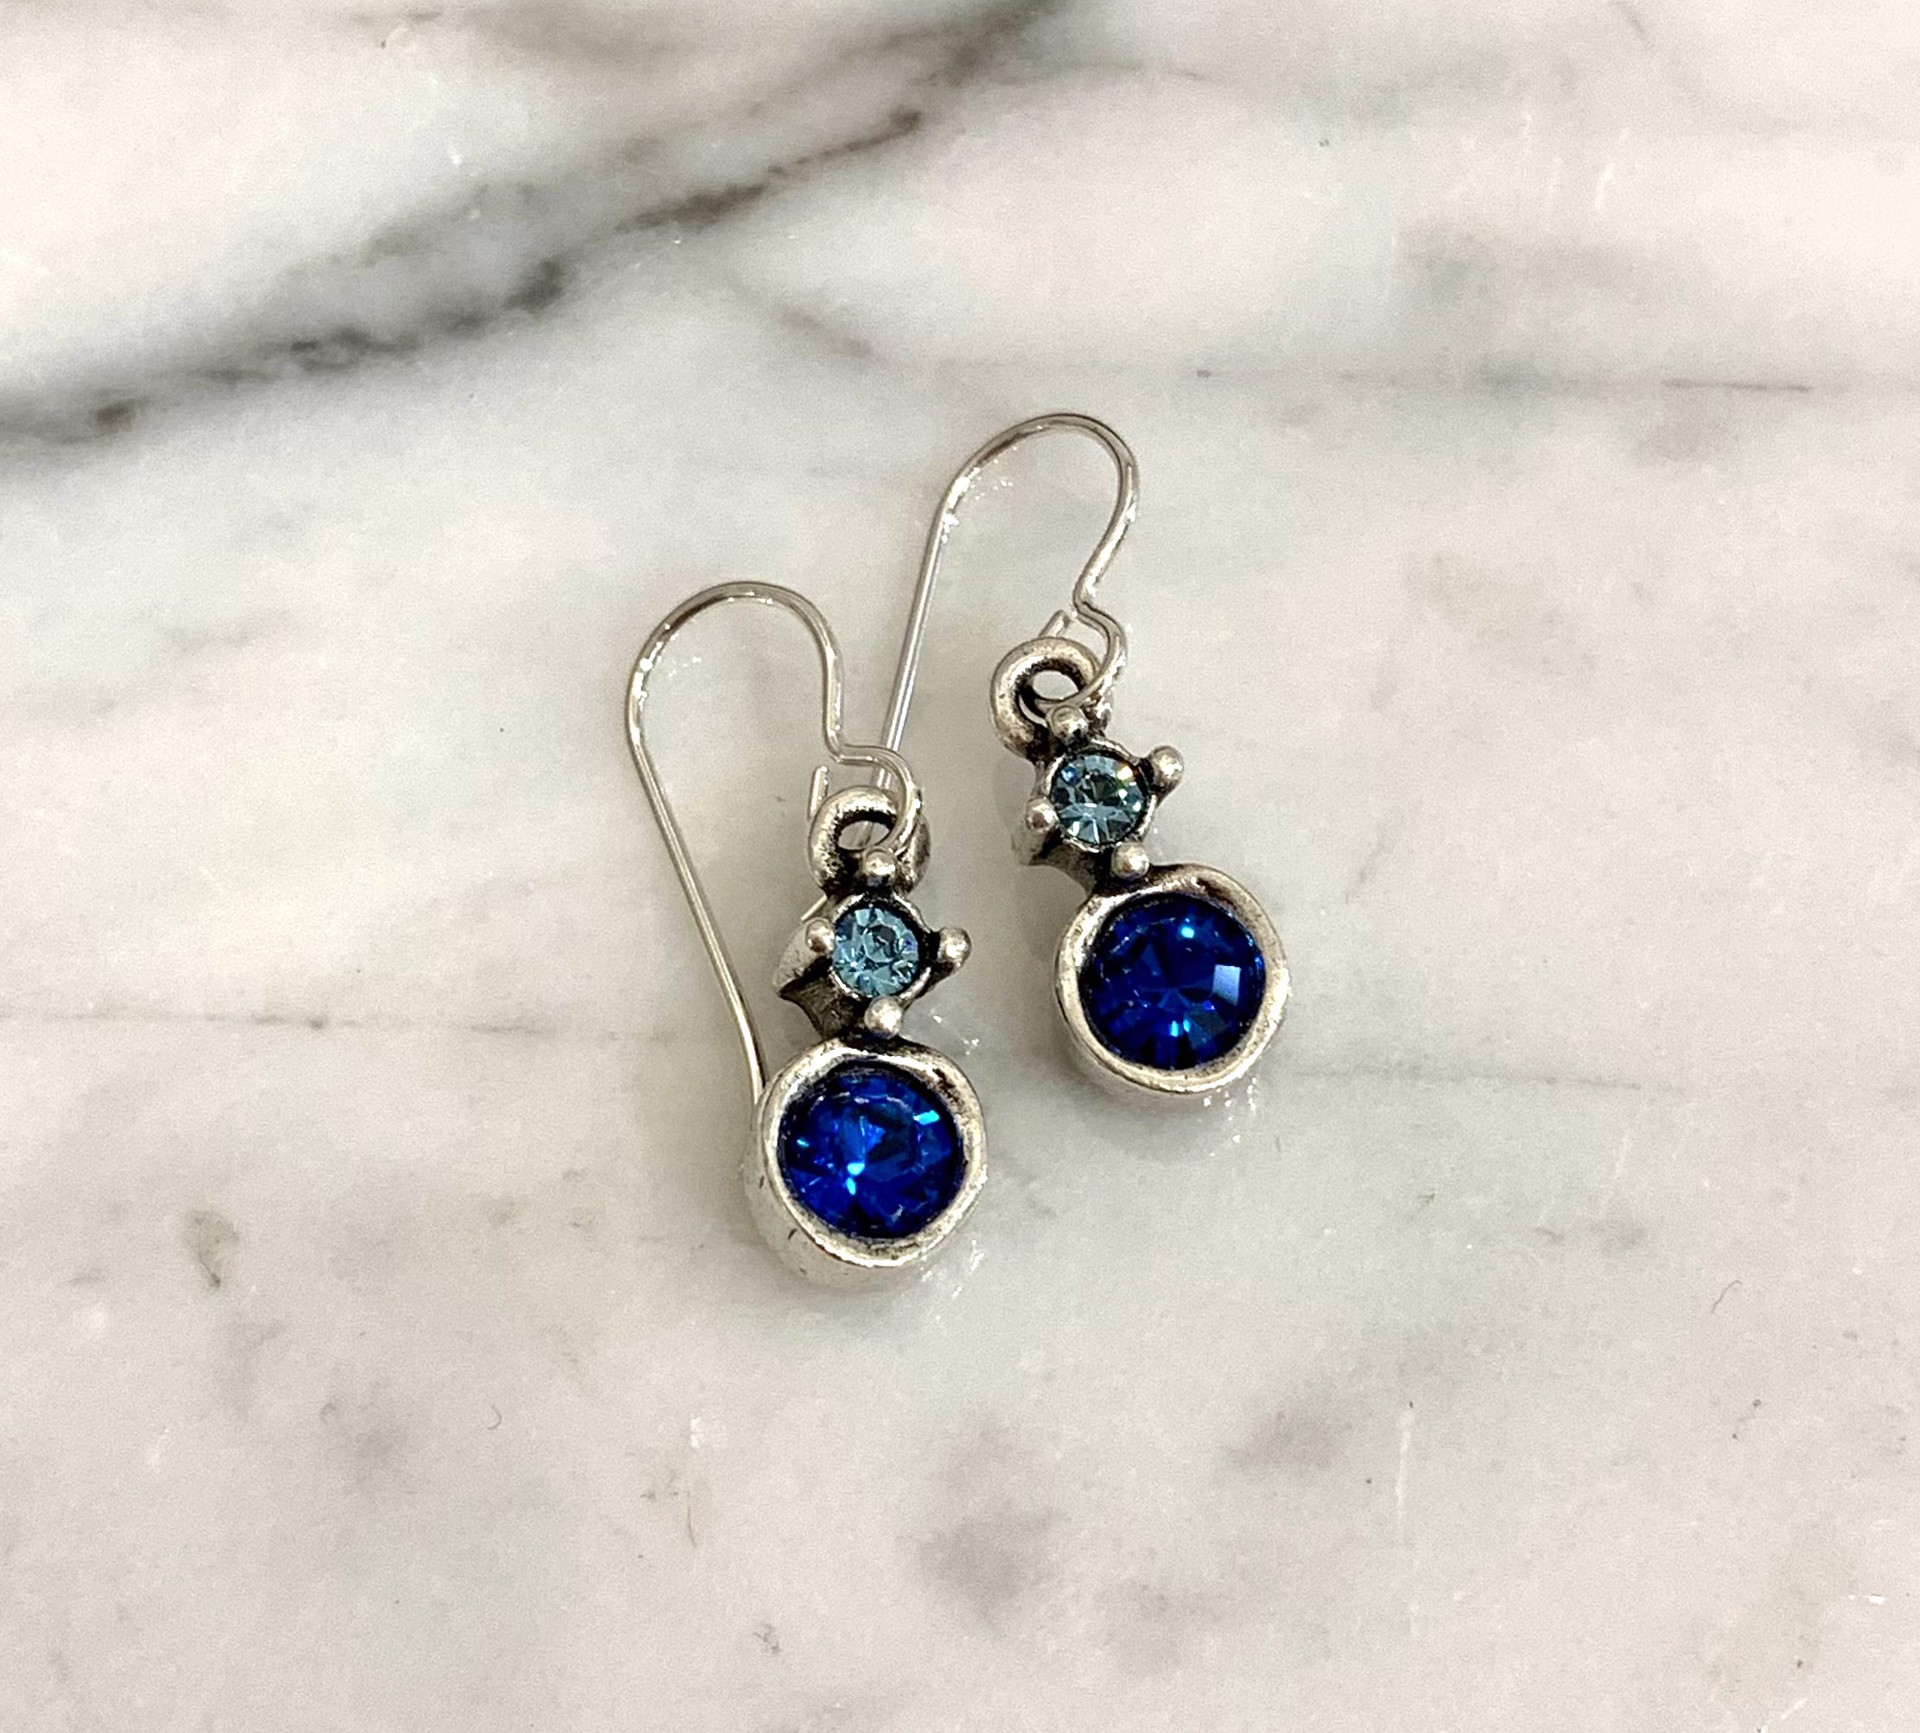 Double Dip Earrings In Indicolite and Pacific Opal by Patricia Locke